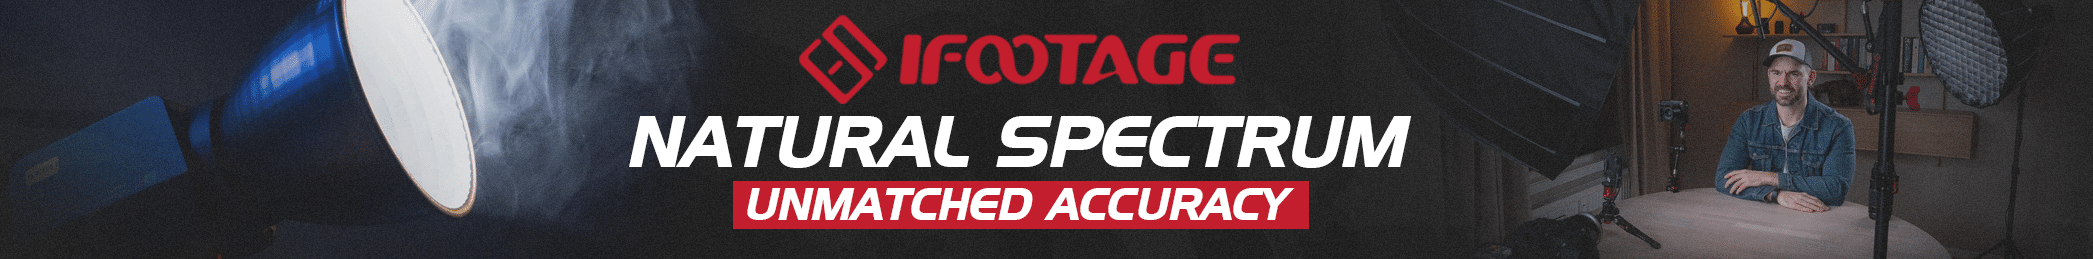 iFootage - Natural Spectrum - Unmatched Accuracy